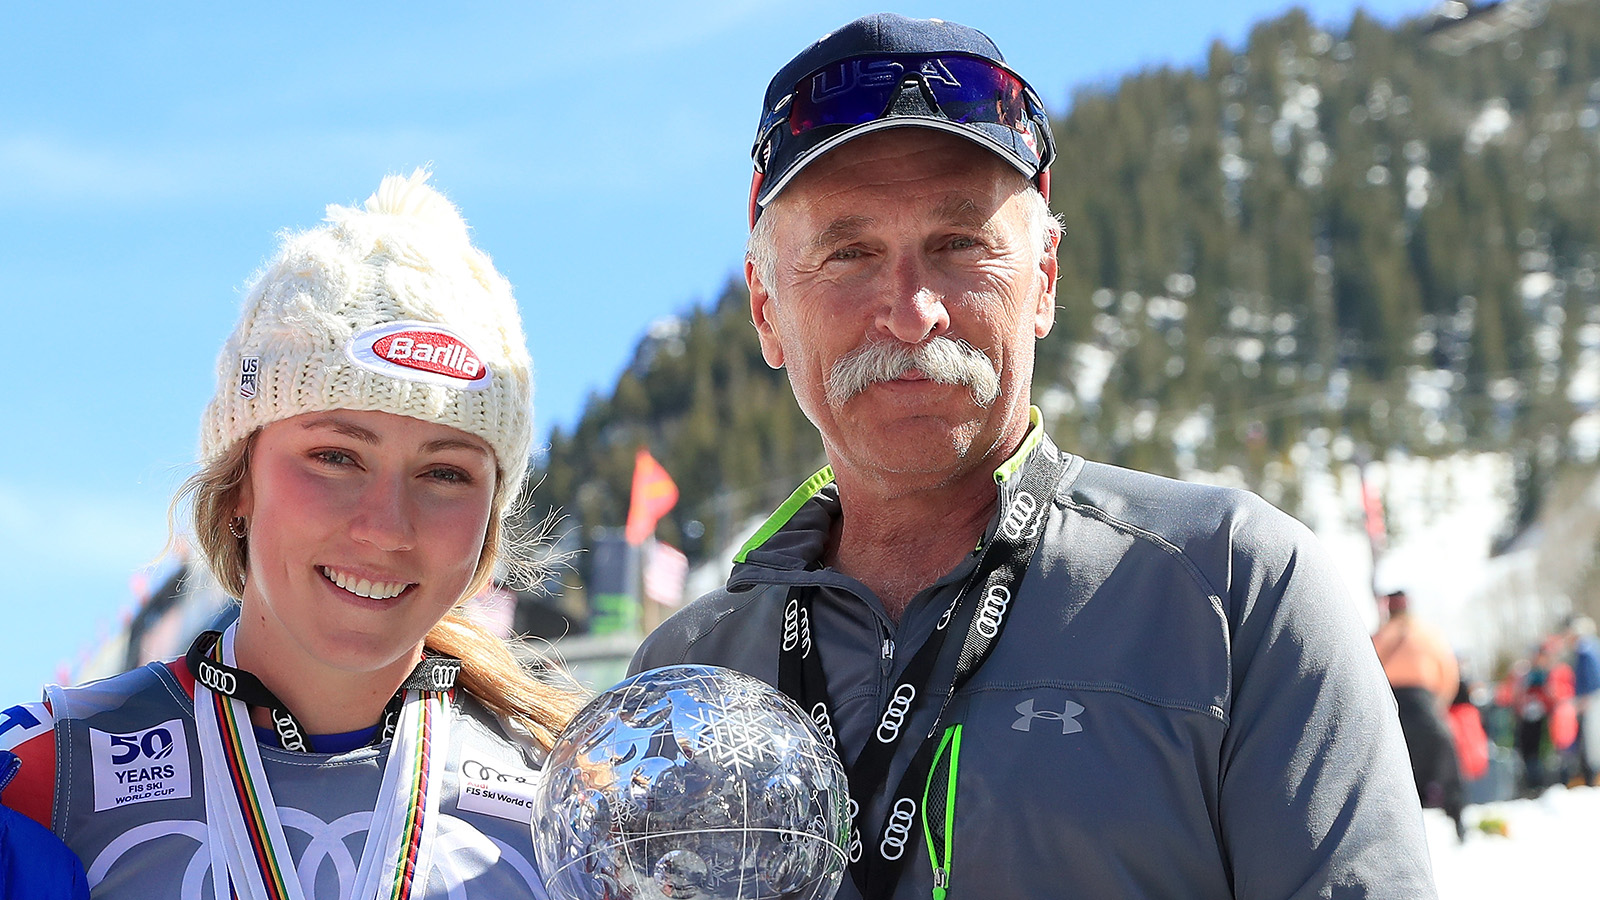 Mikaela Shiffrin and Jeff Shiffrin pose at the 2017 Audi FIS Ski World Cup Finals at Aspen Mountain on March 19, 2017.